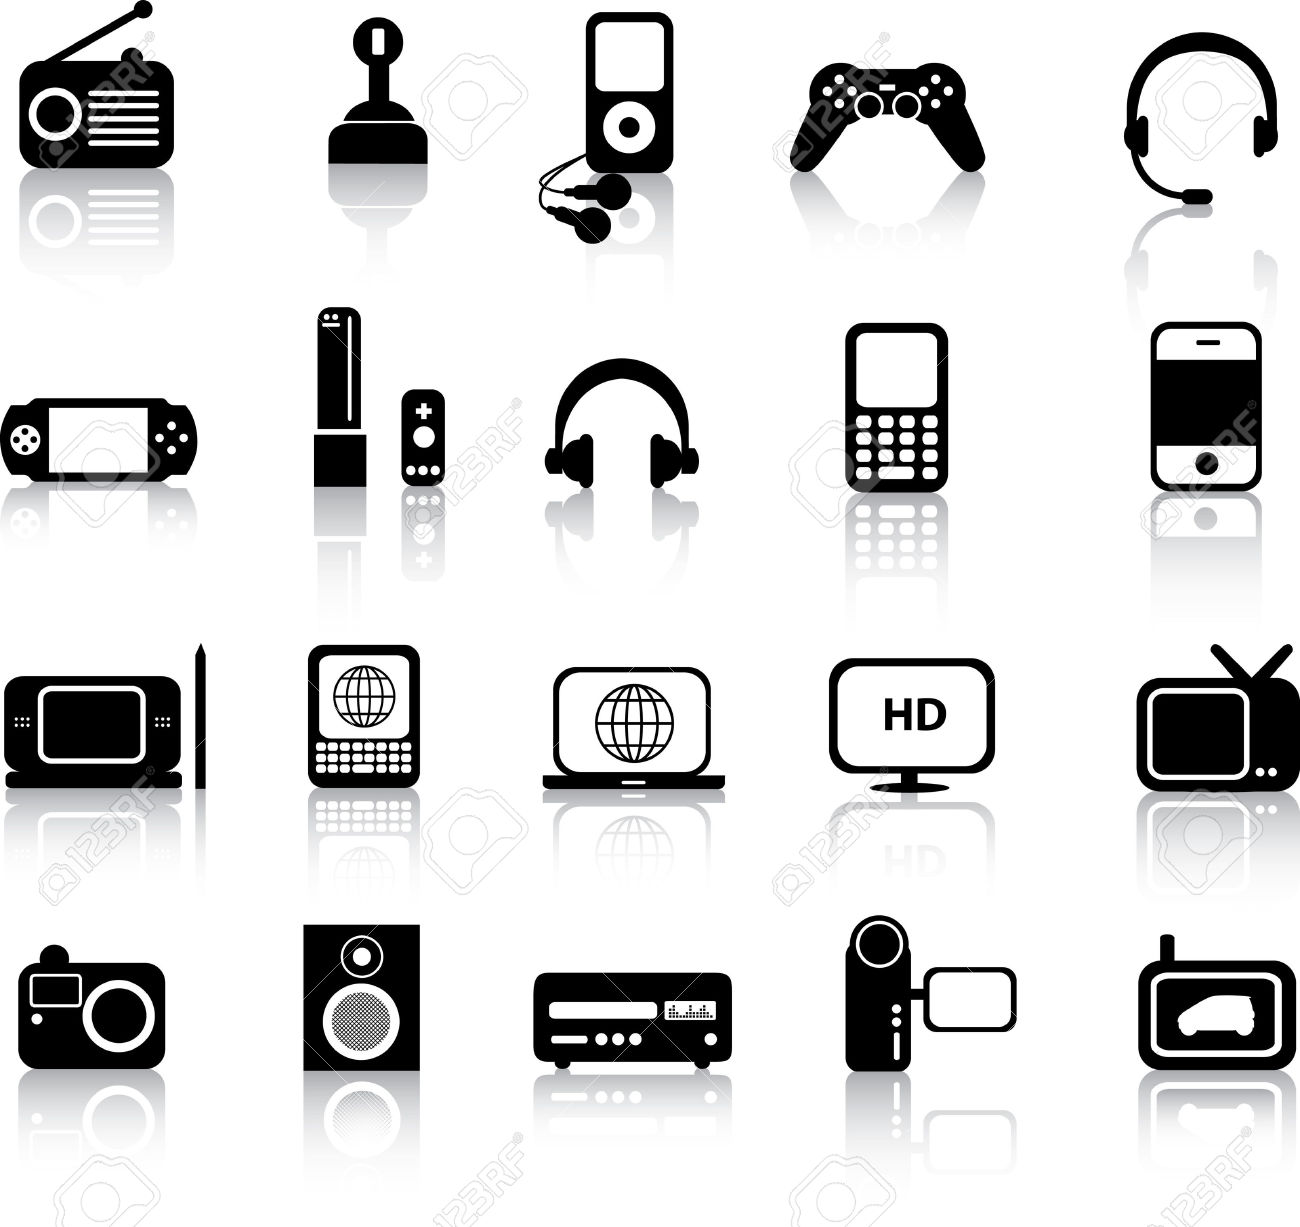 electronic devices clipart